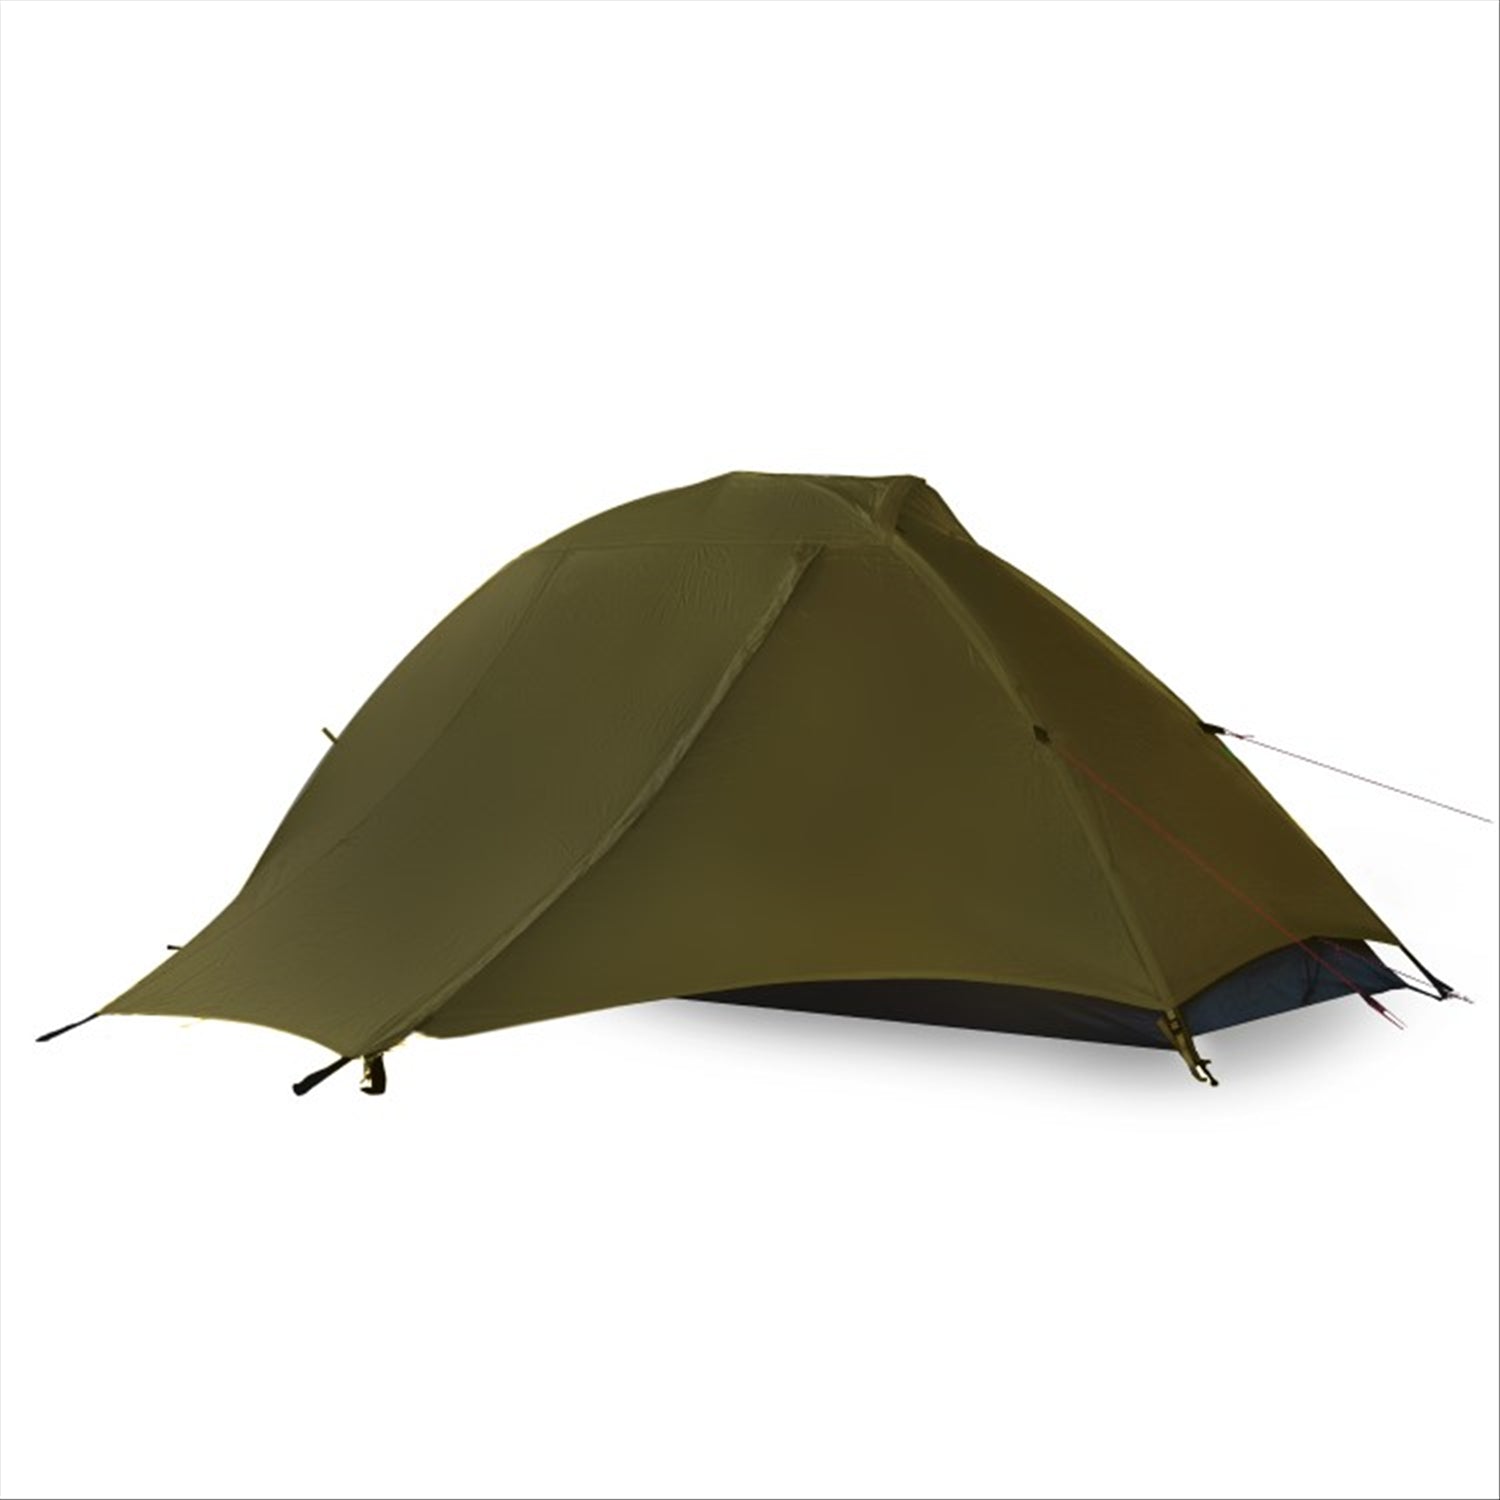 Ace 1 - 'All Weather' Lightweight 1 Person Hiking Tent 2.15kg